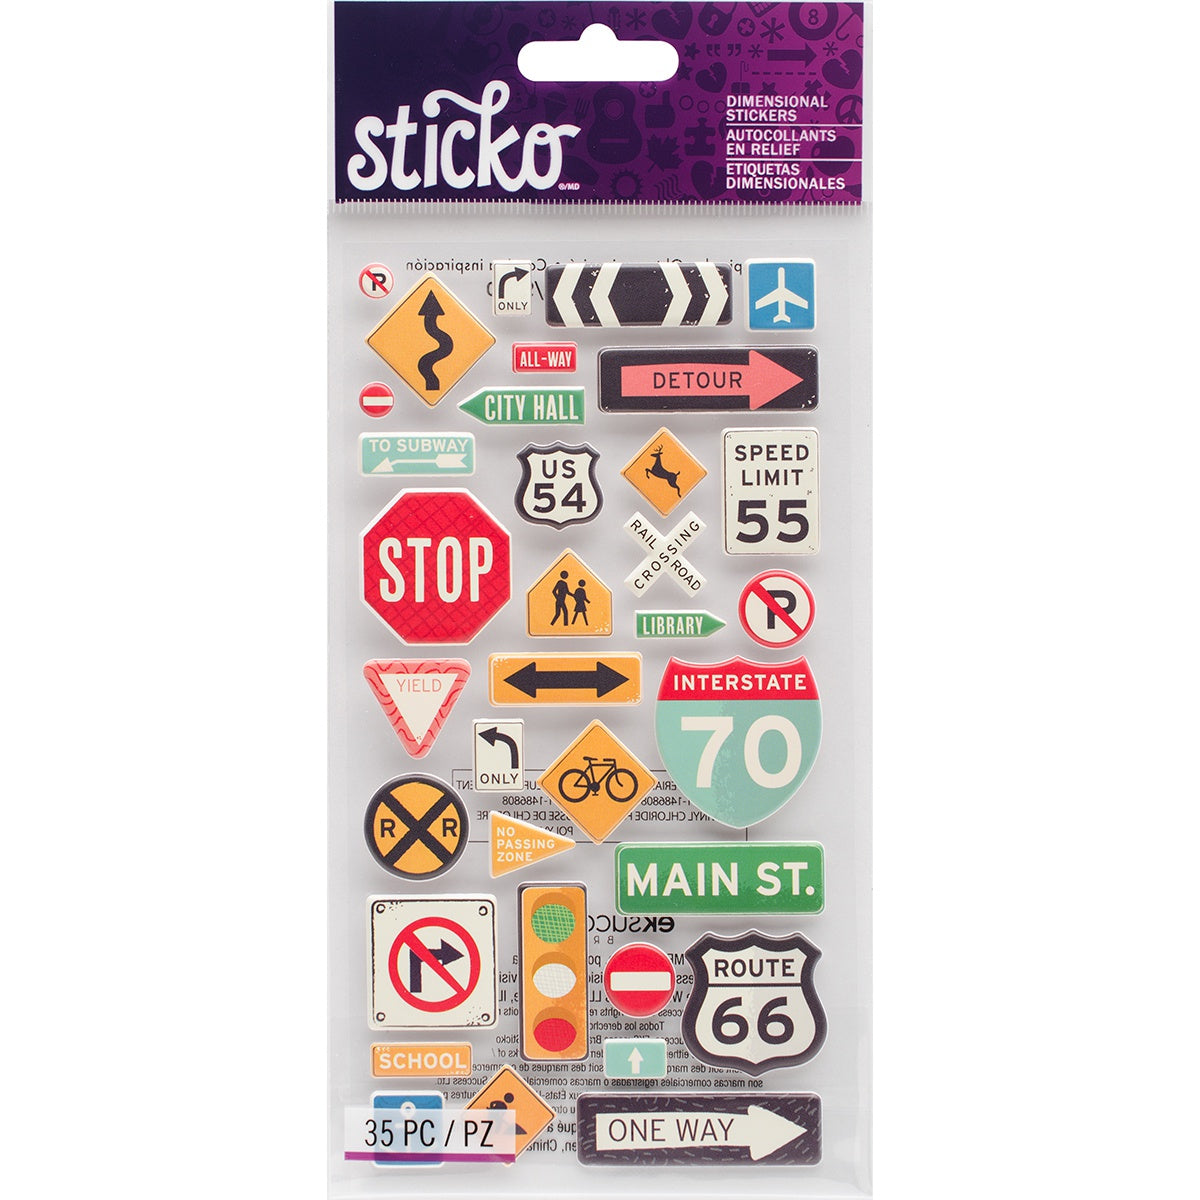 Multipack of 3 - Sticko Dimensional Stickers-Road Signs